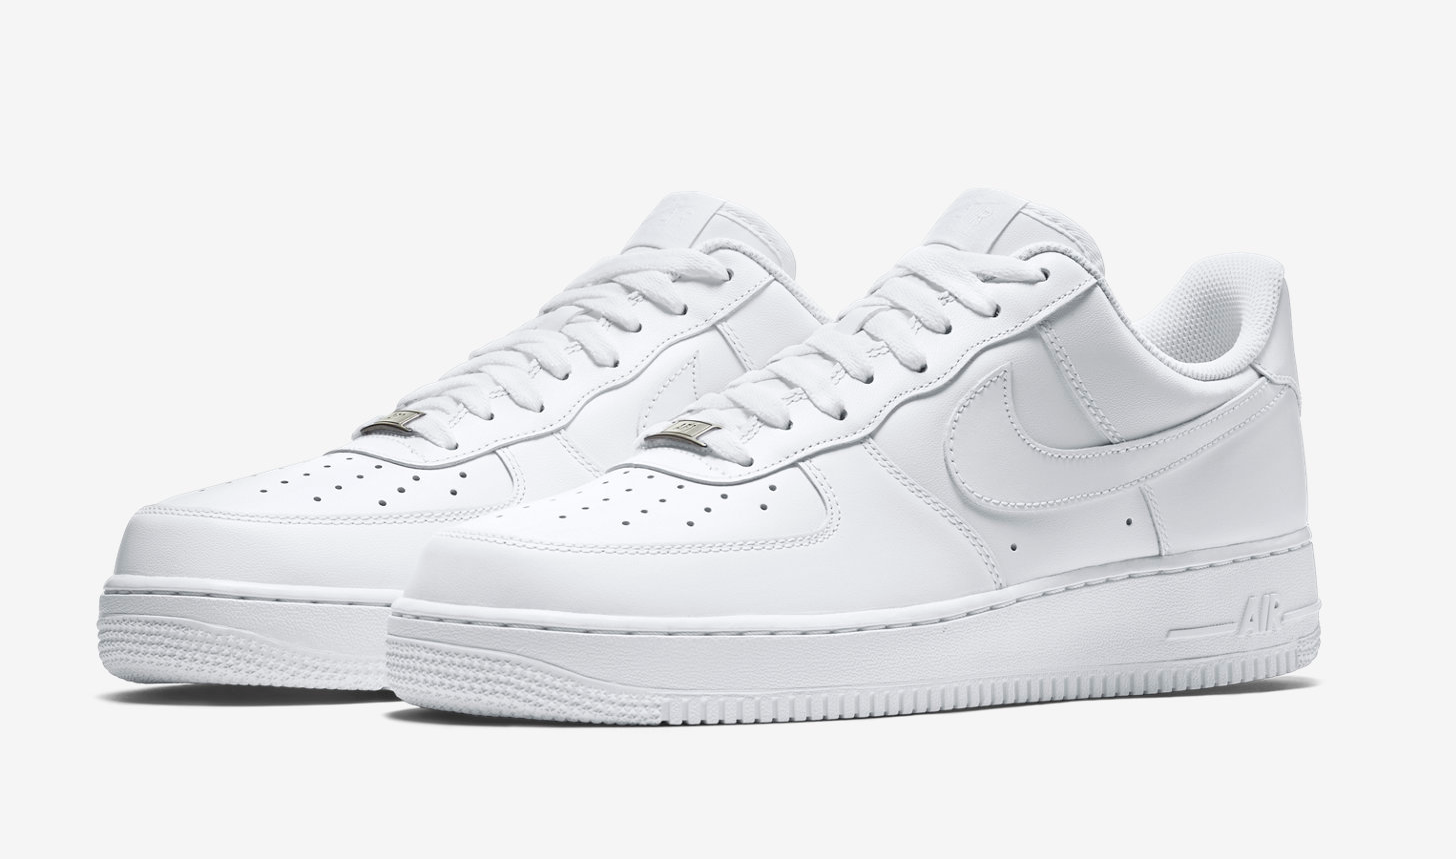 Nike Air Force 1 07 LV8 1 - Proof Culture